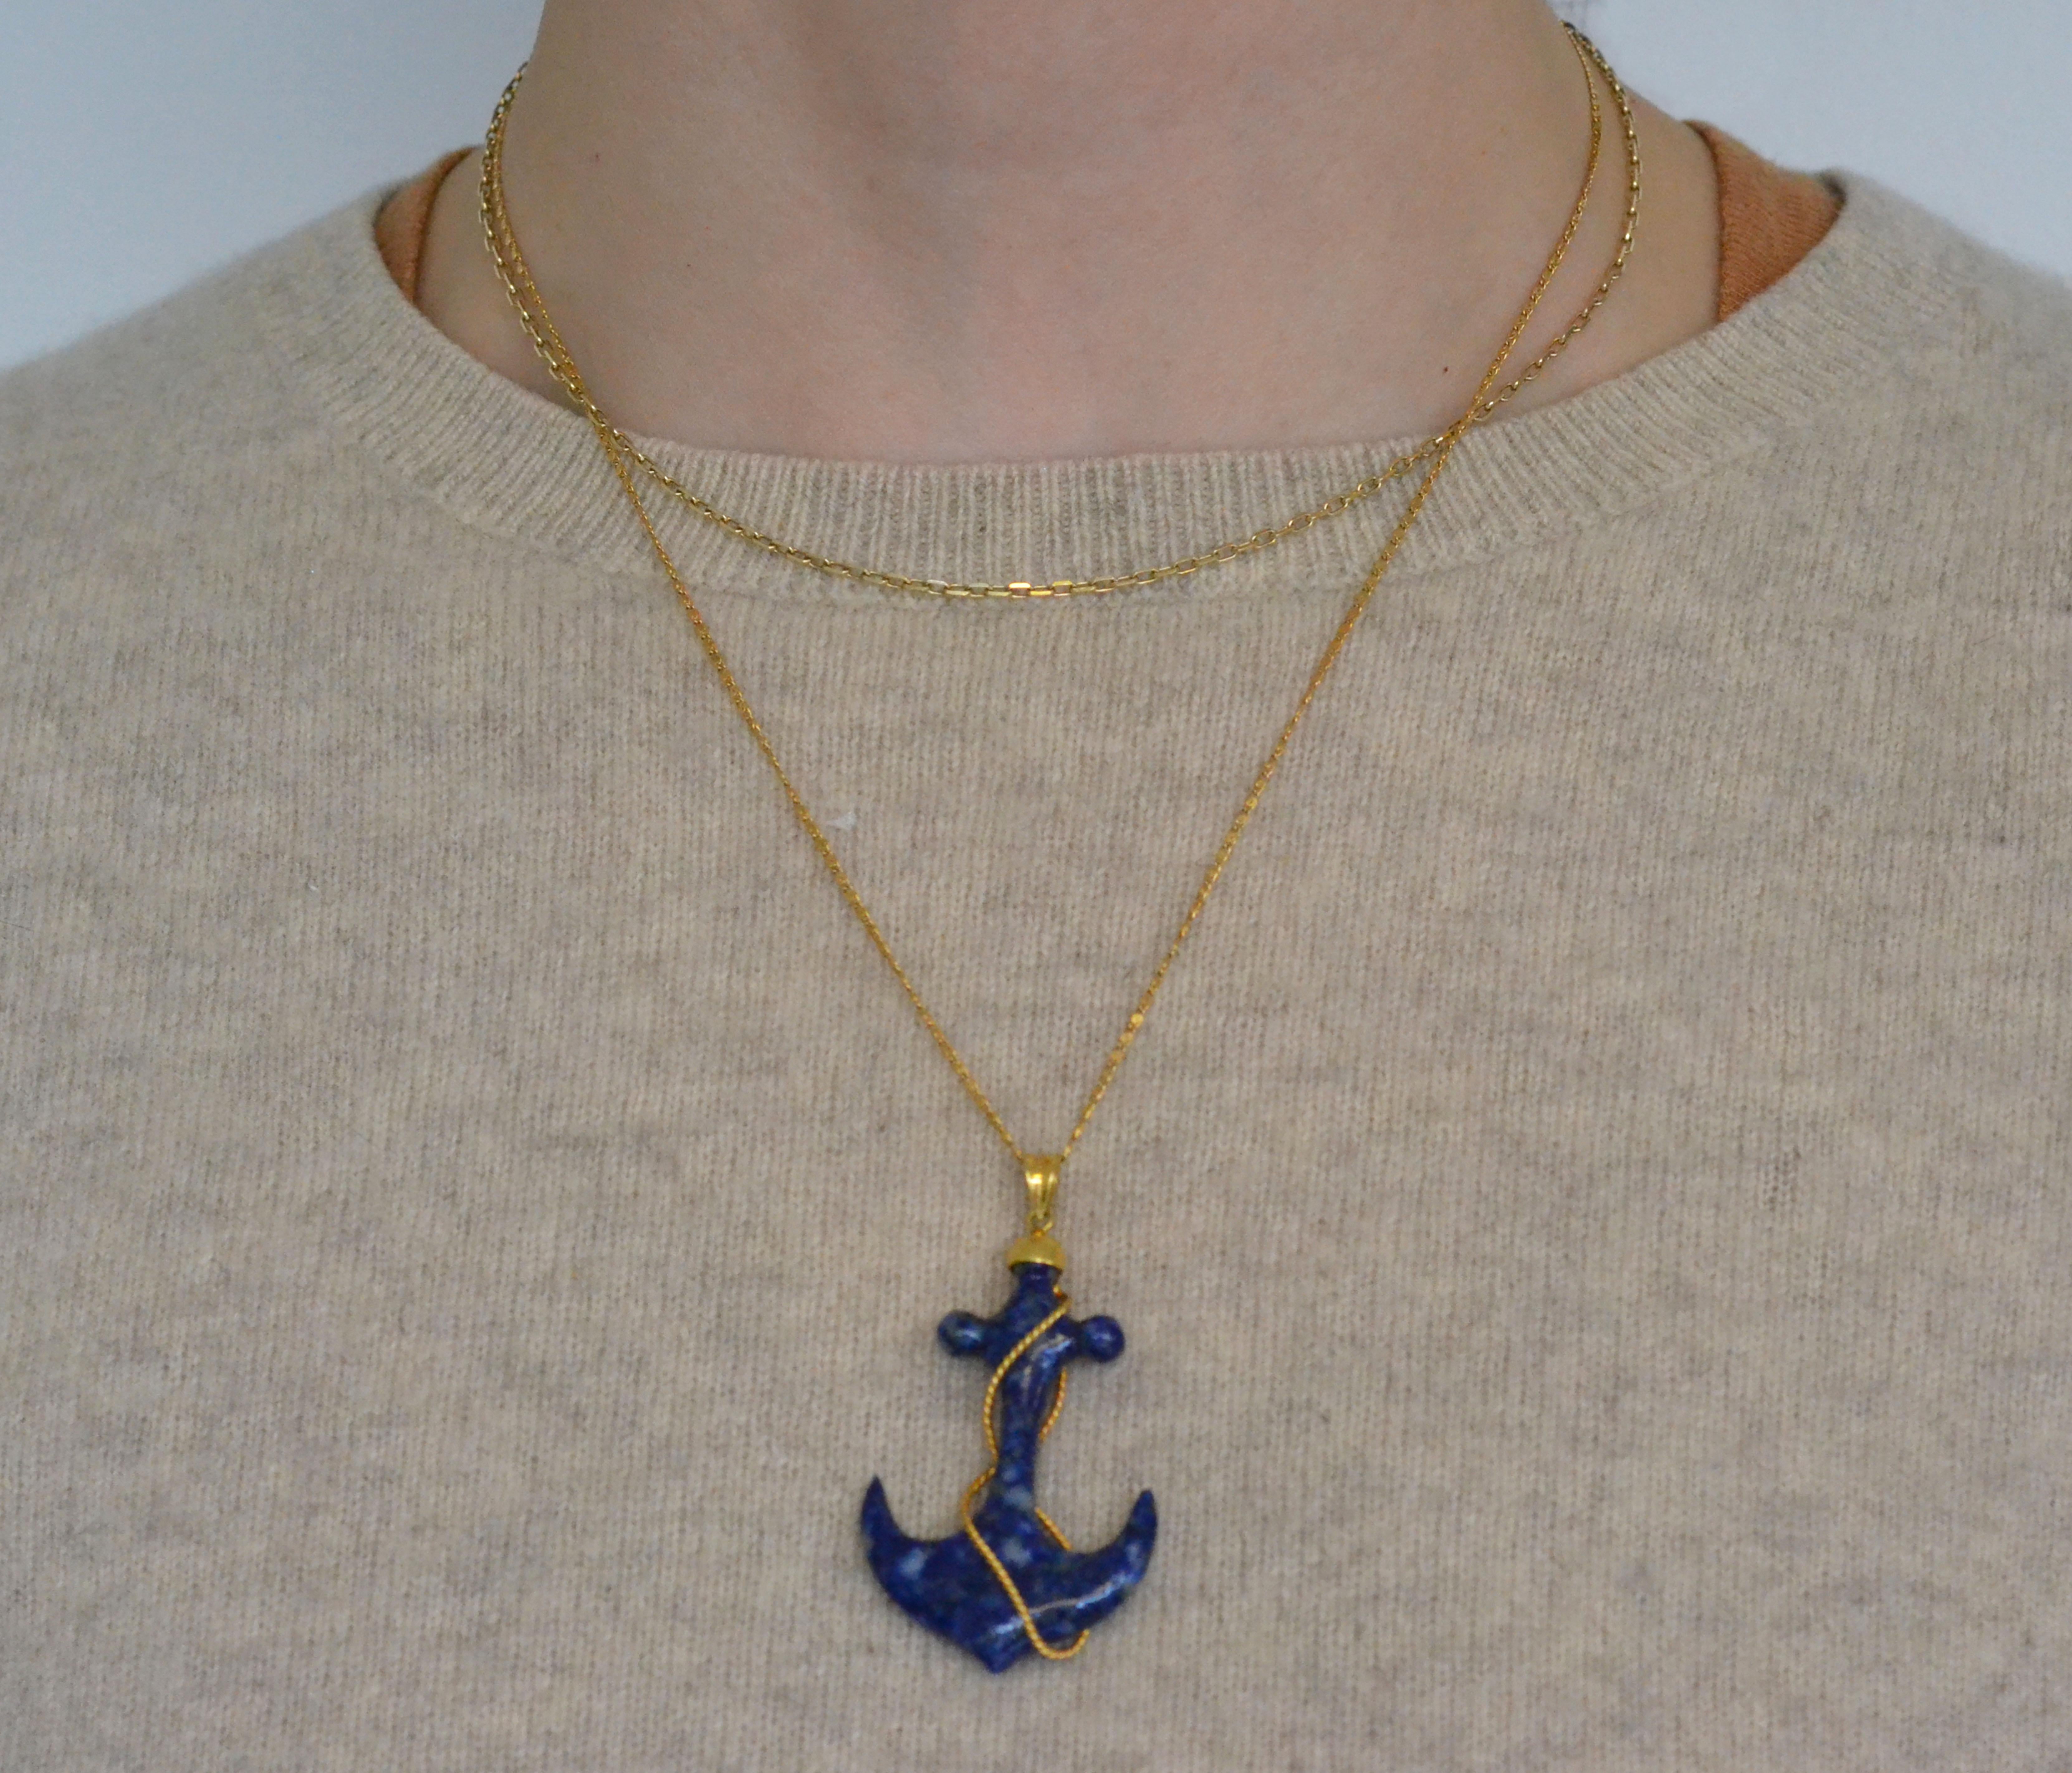 Vintage 18k Gold Sodalite Anchor Pendant Limited Edition

These stunning anchor pendants come on a solid 18k yellow gold chain and make for the perfect statement necklace. In a variety of colours, these pendants are perfect for a day out on the